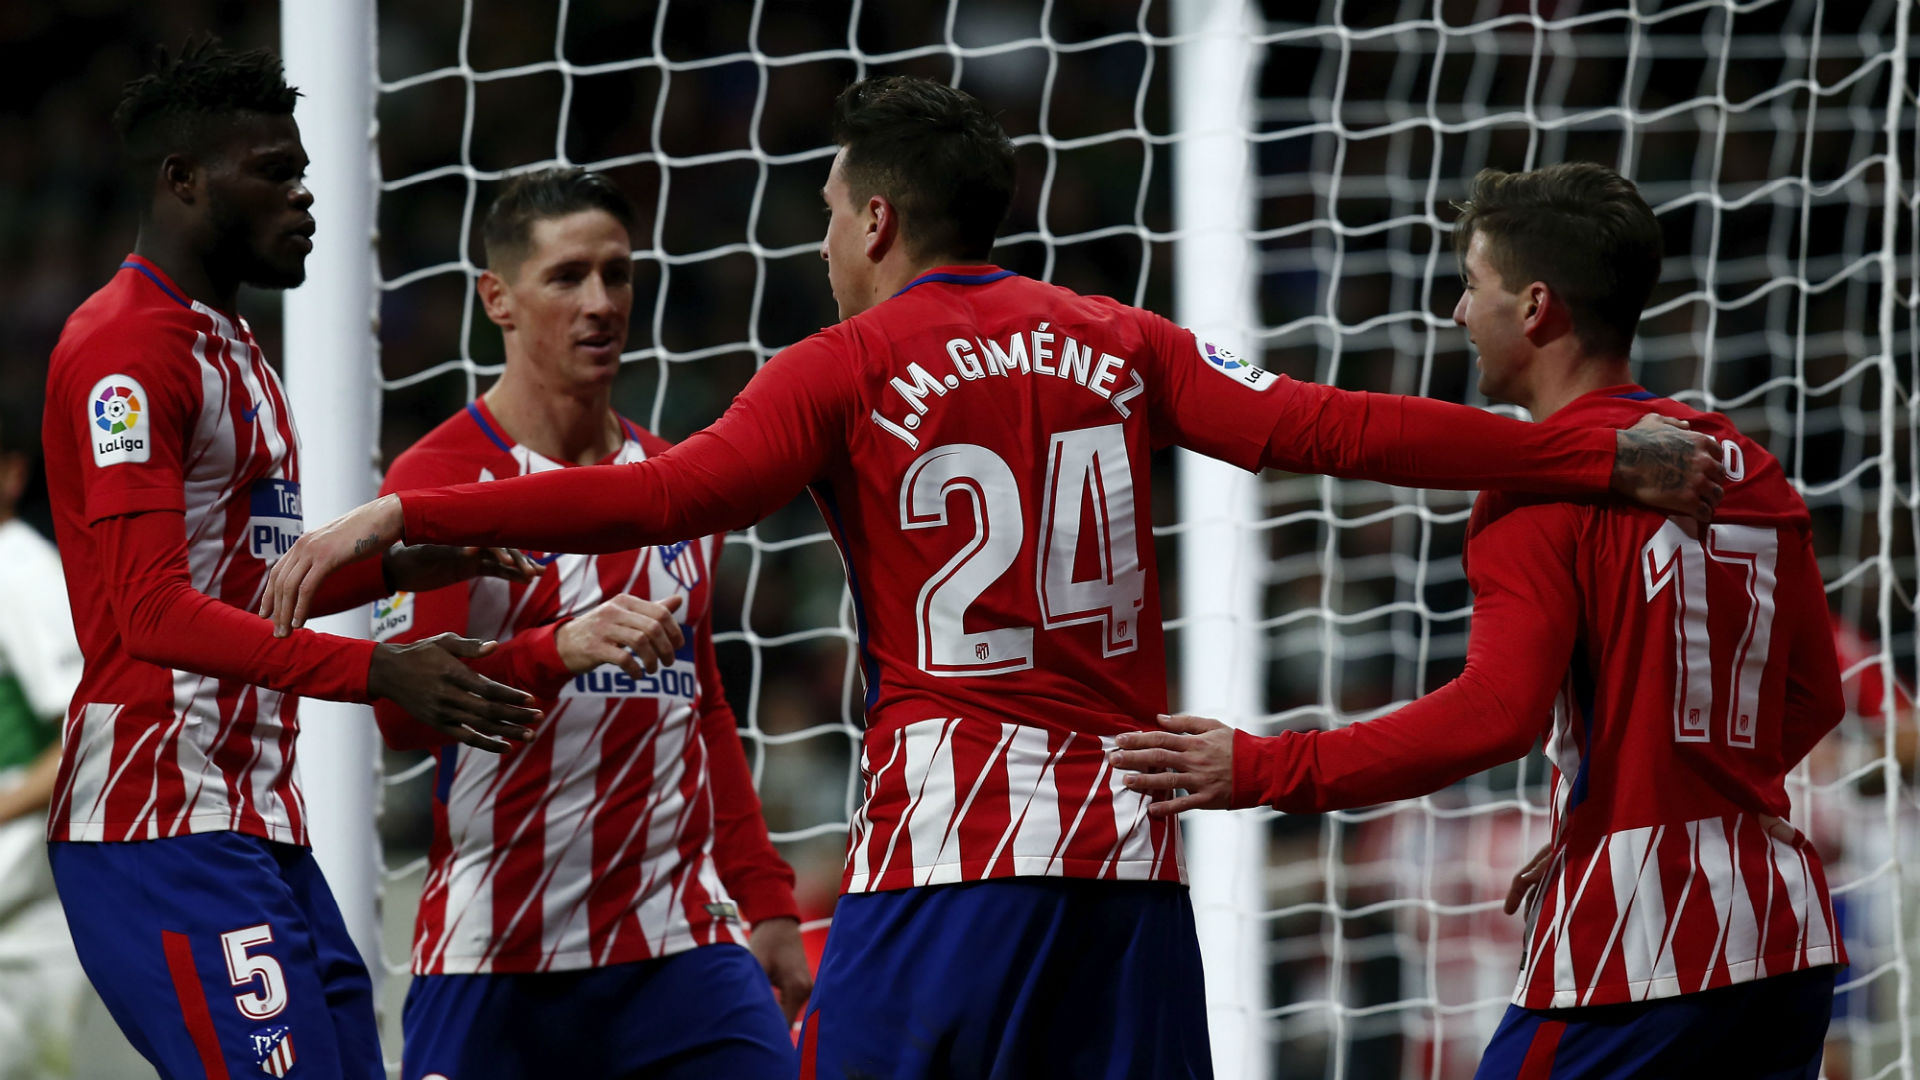 Atletico Madrid 3 Elche 0 (4-1 agg): Torres double sees Simeone's men cruise through